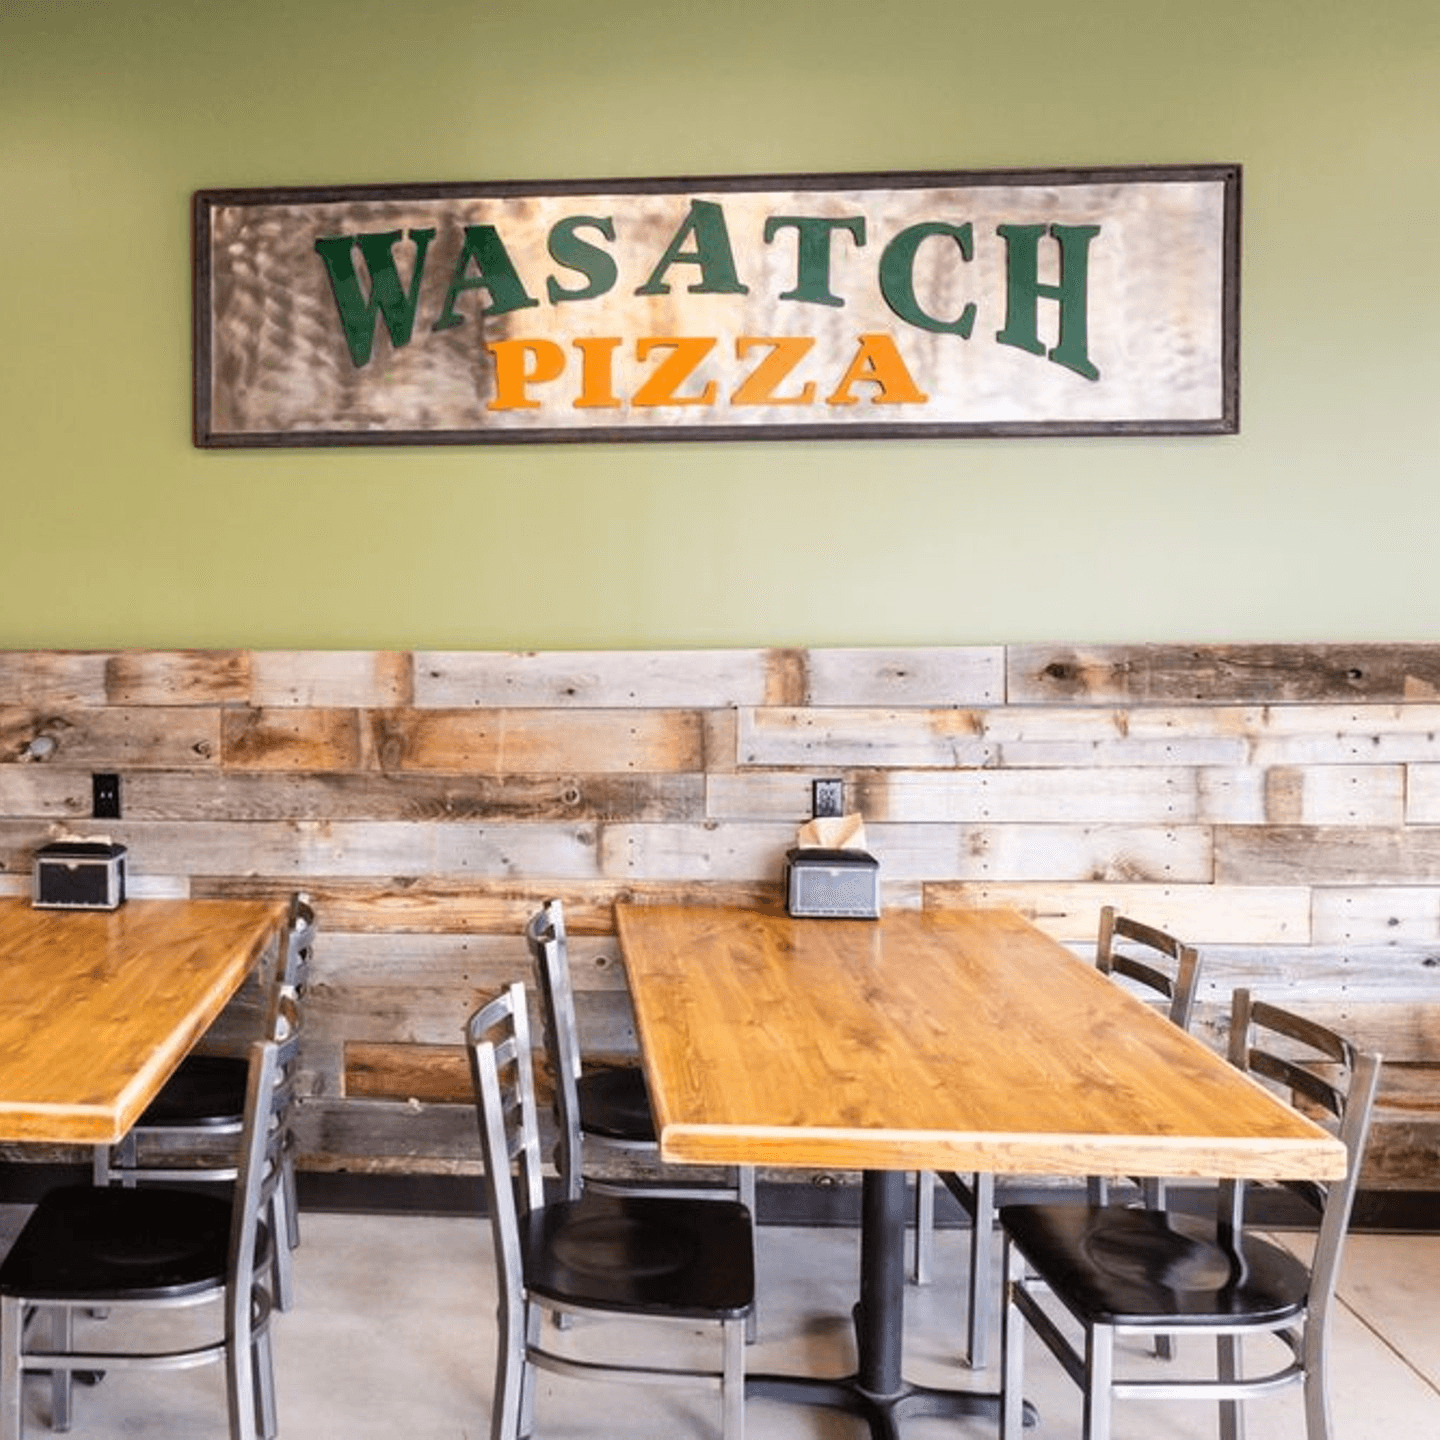 Join Us at Wasatch Pizza